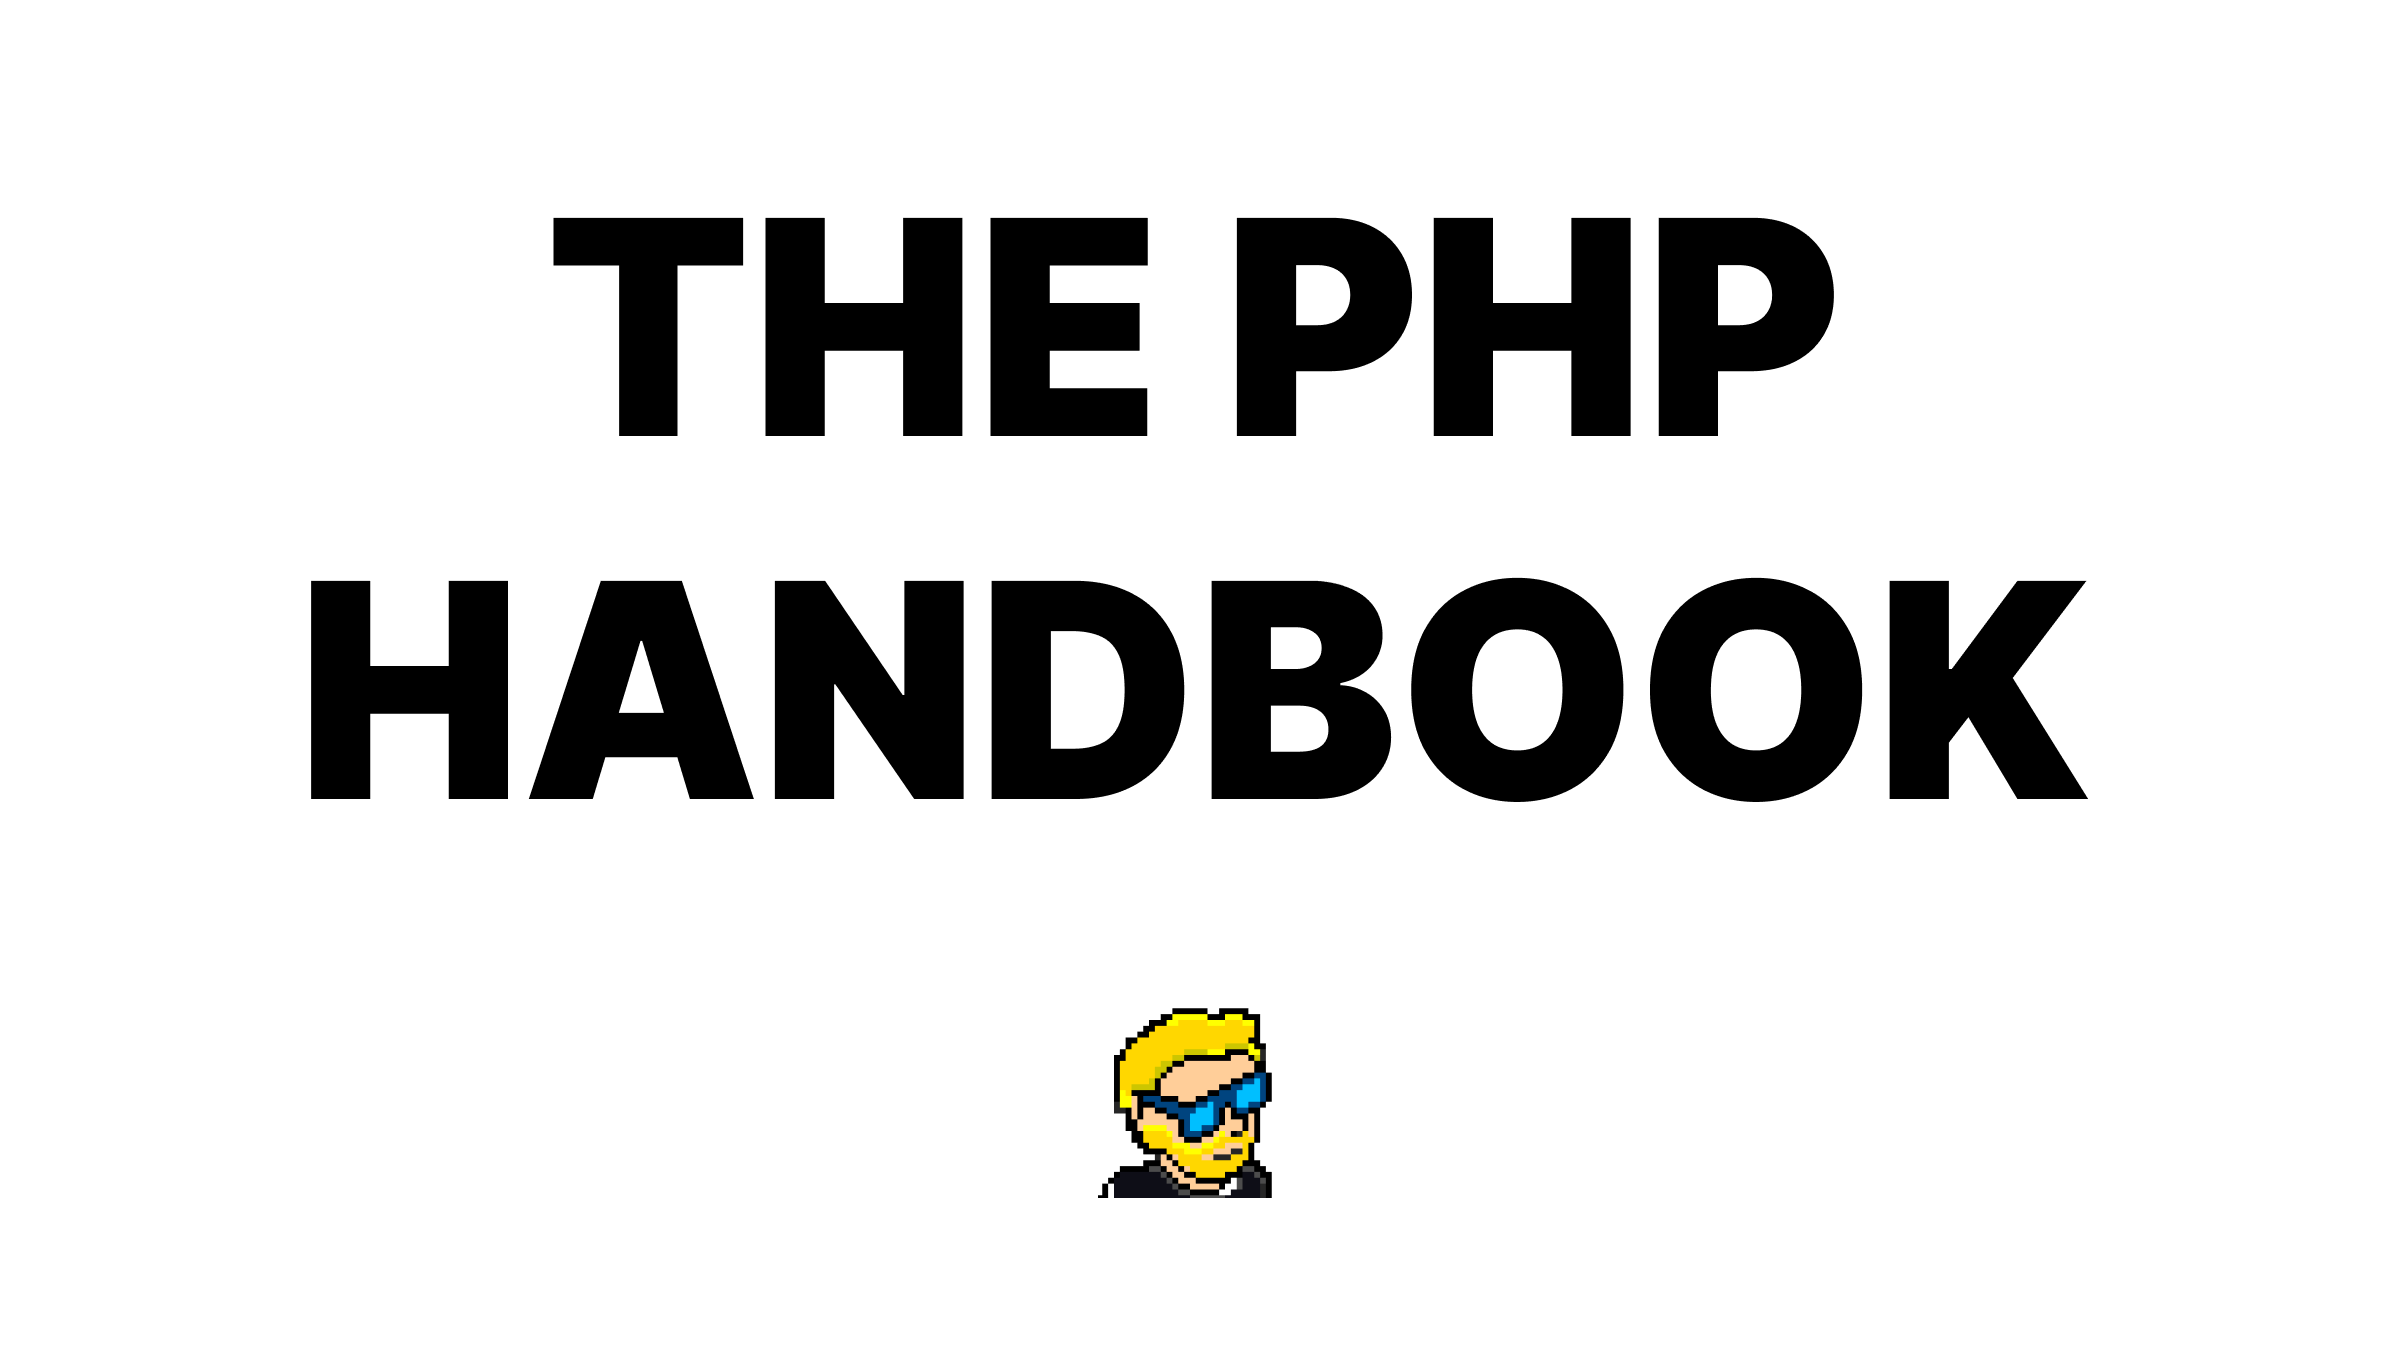 PHP class hierarchy for library system